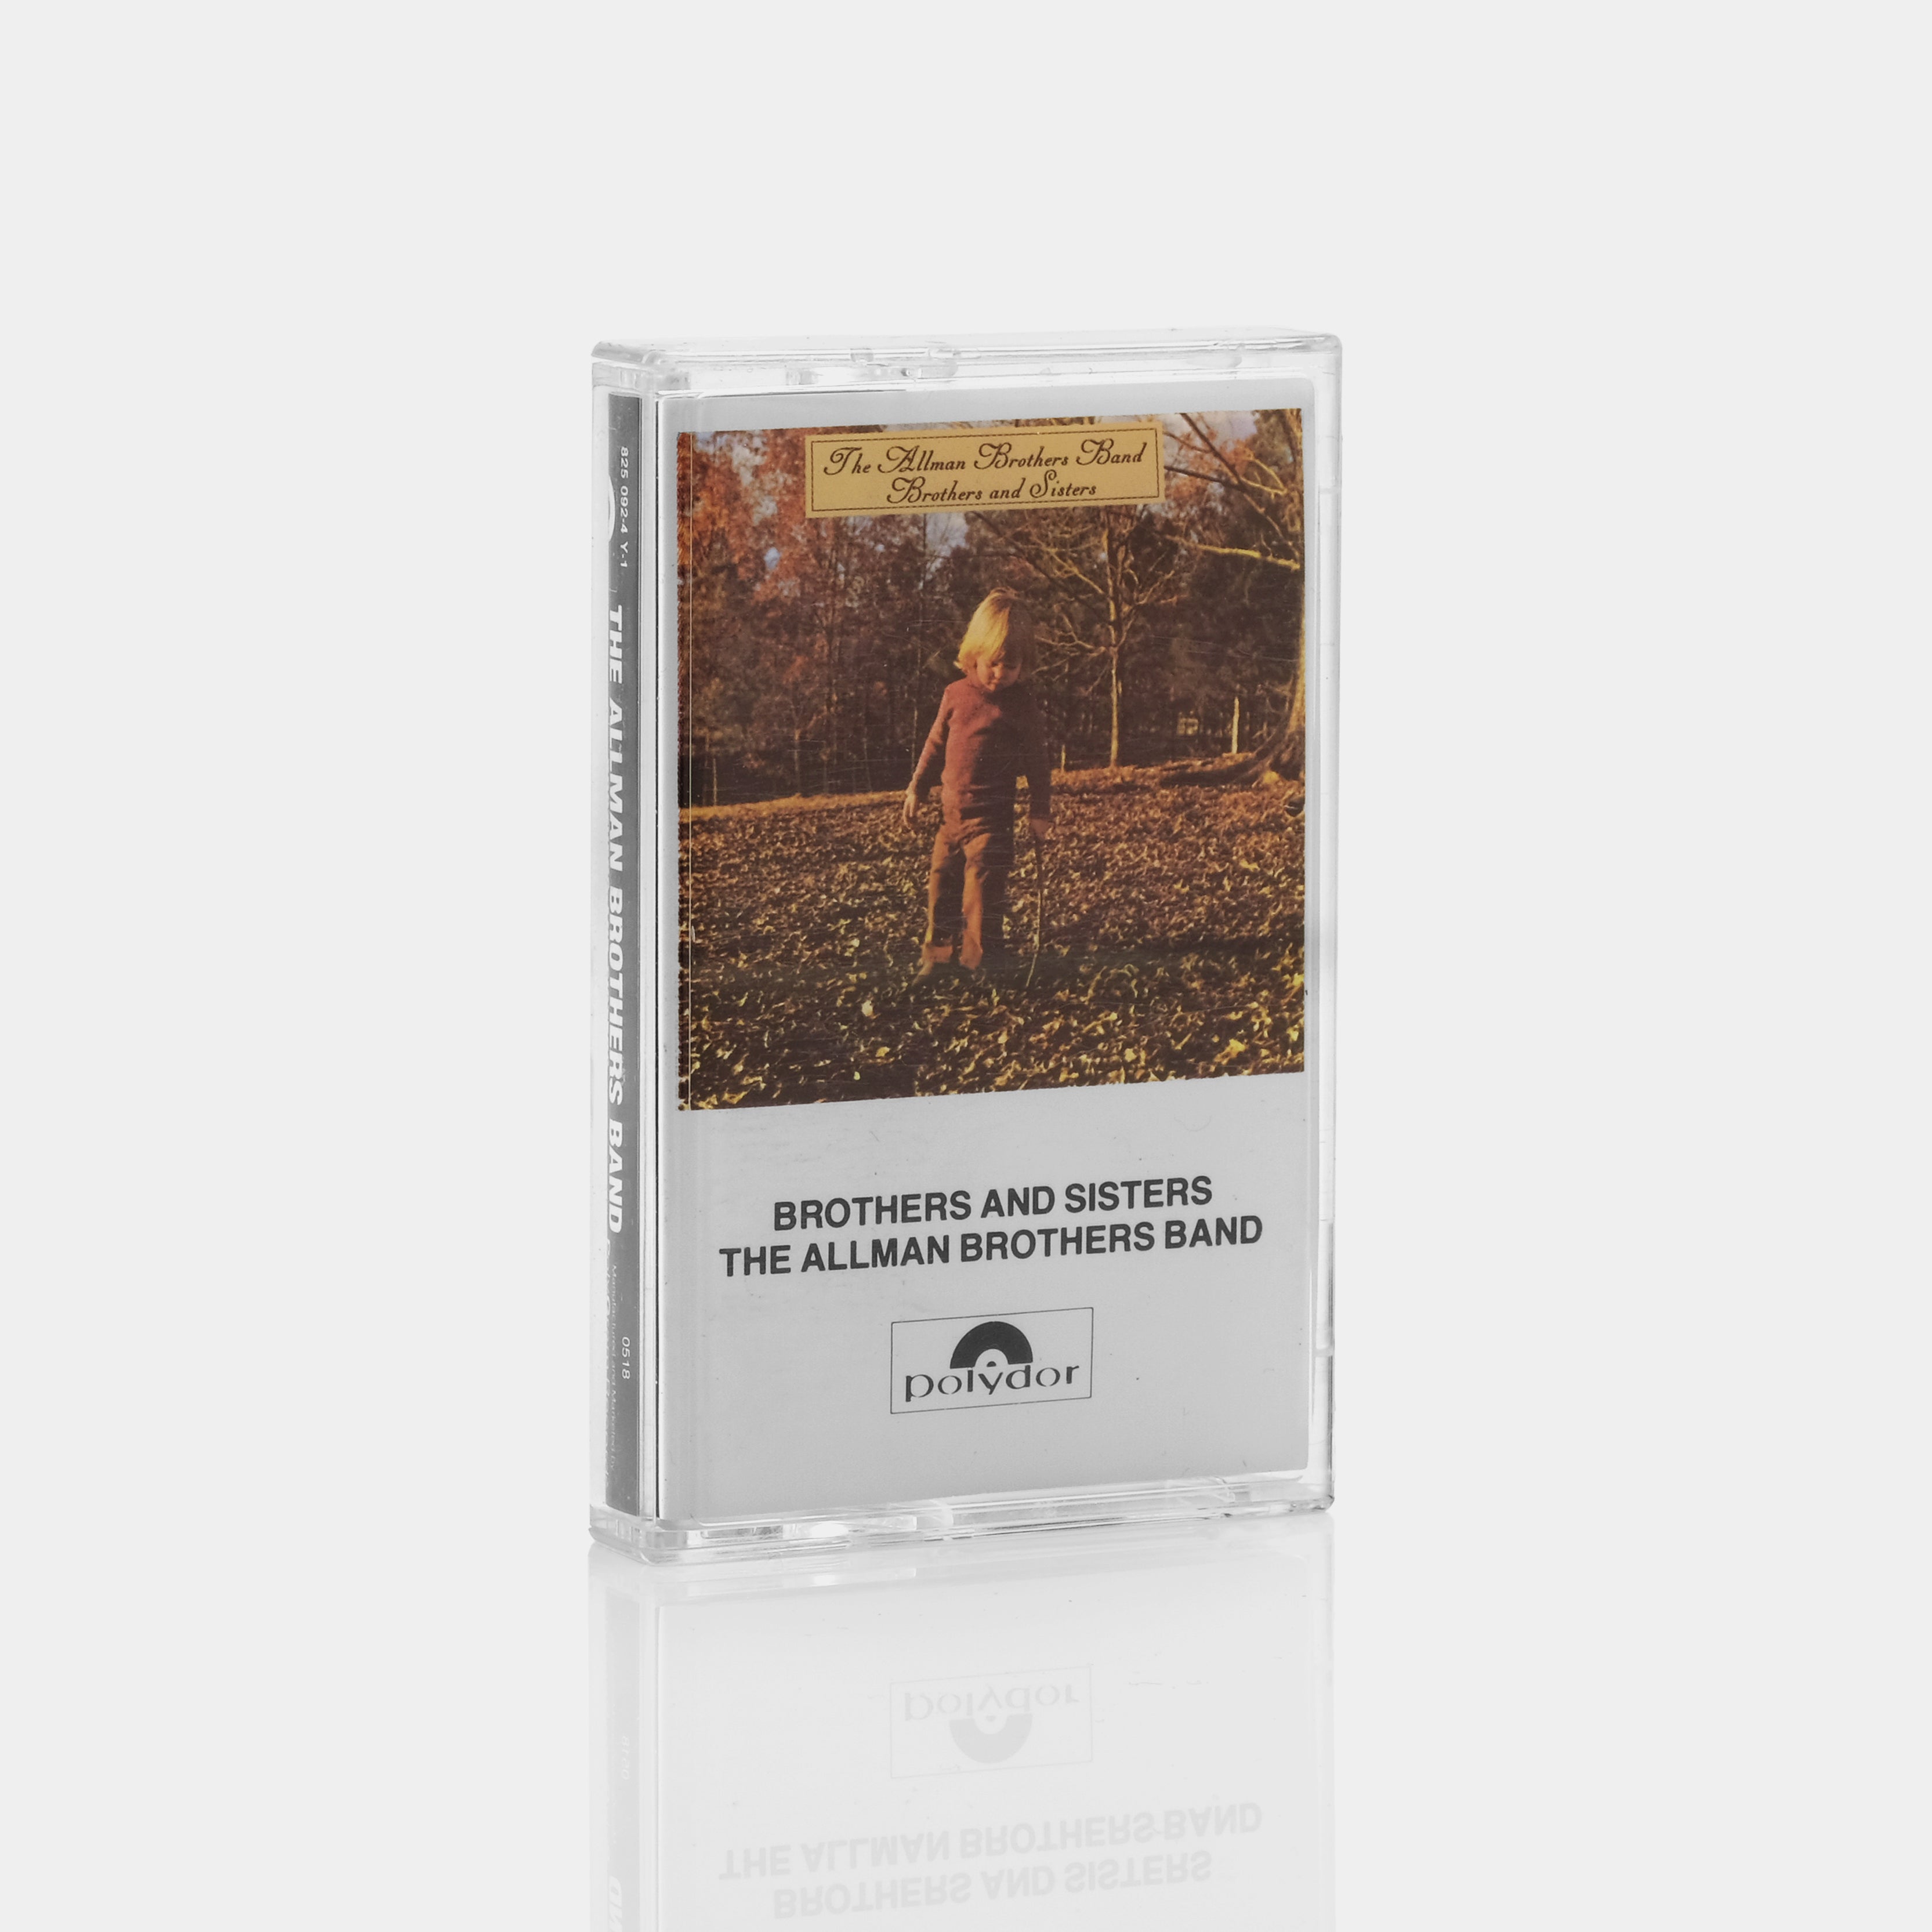 The Allman Brothers Band - Brothers And Sisters Cassette Tape